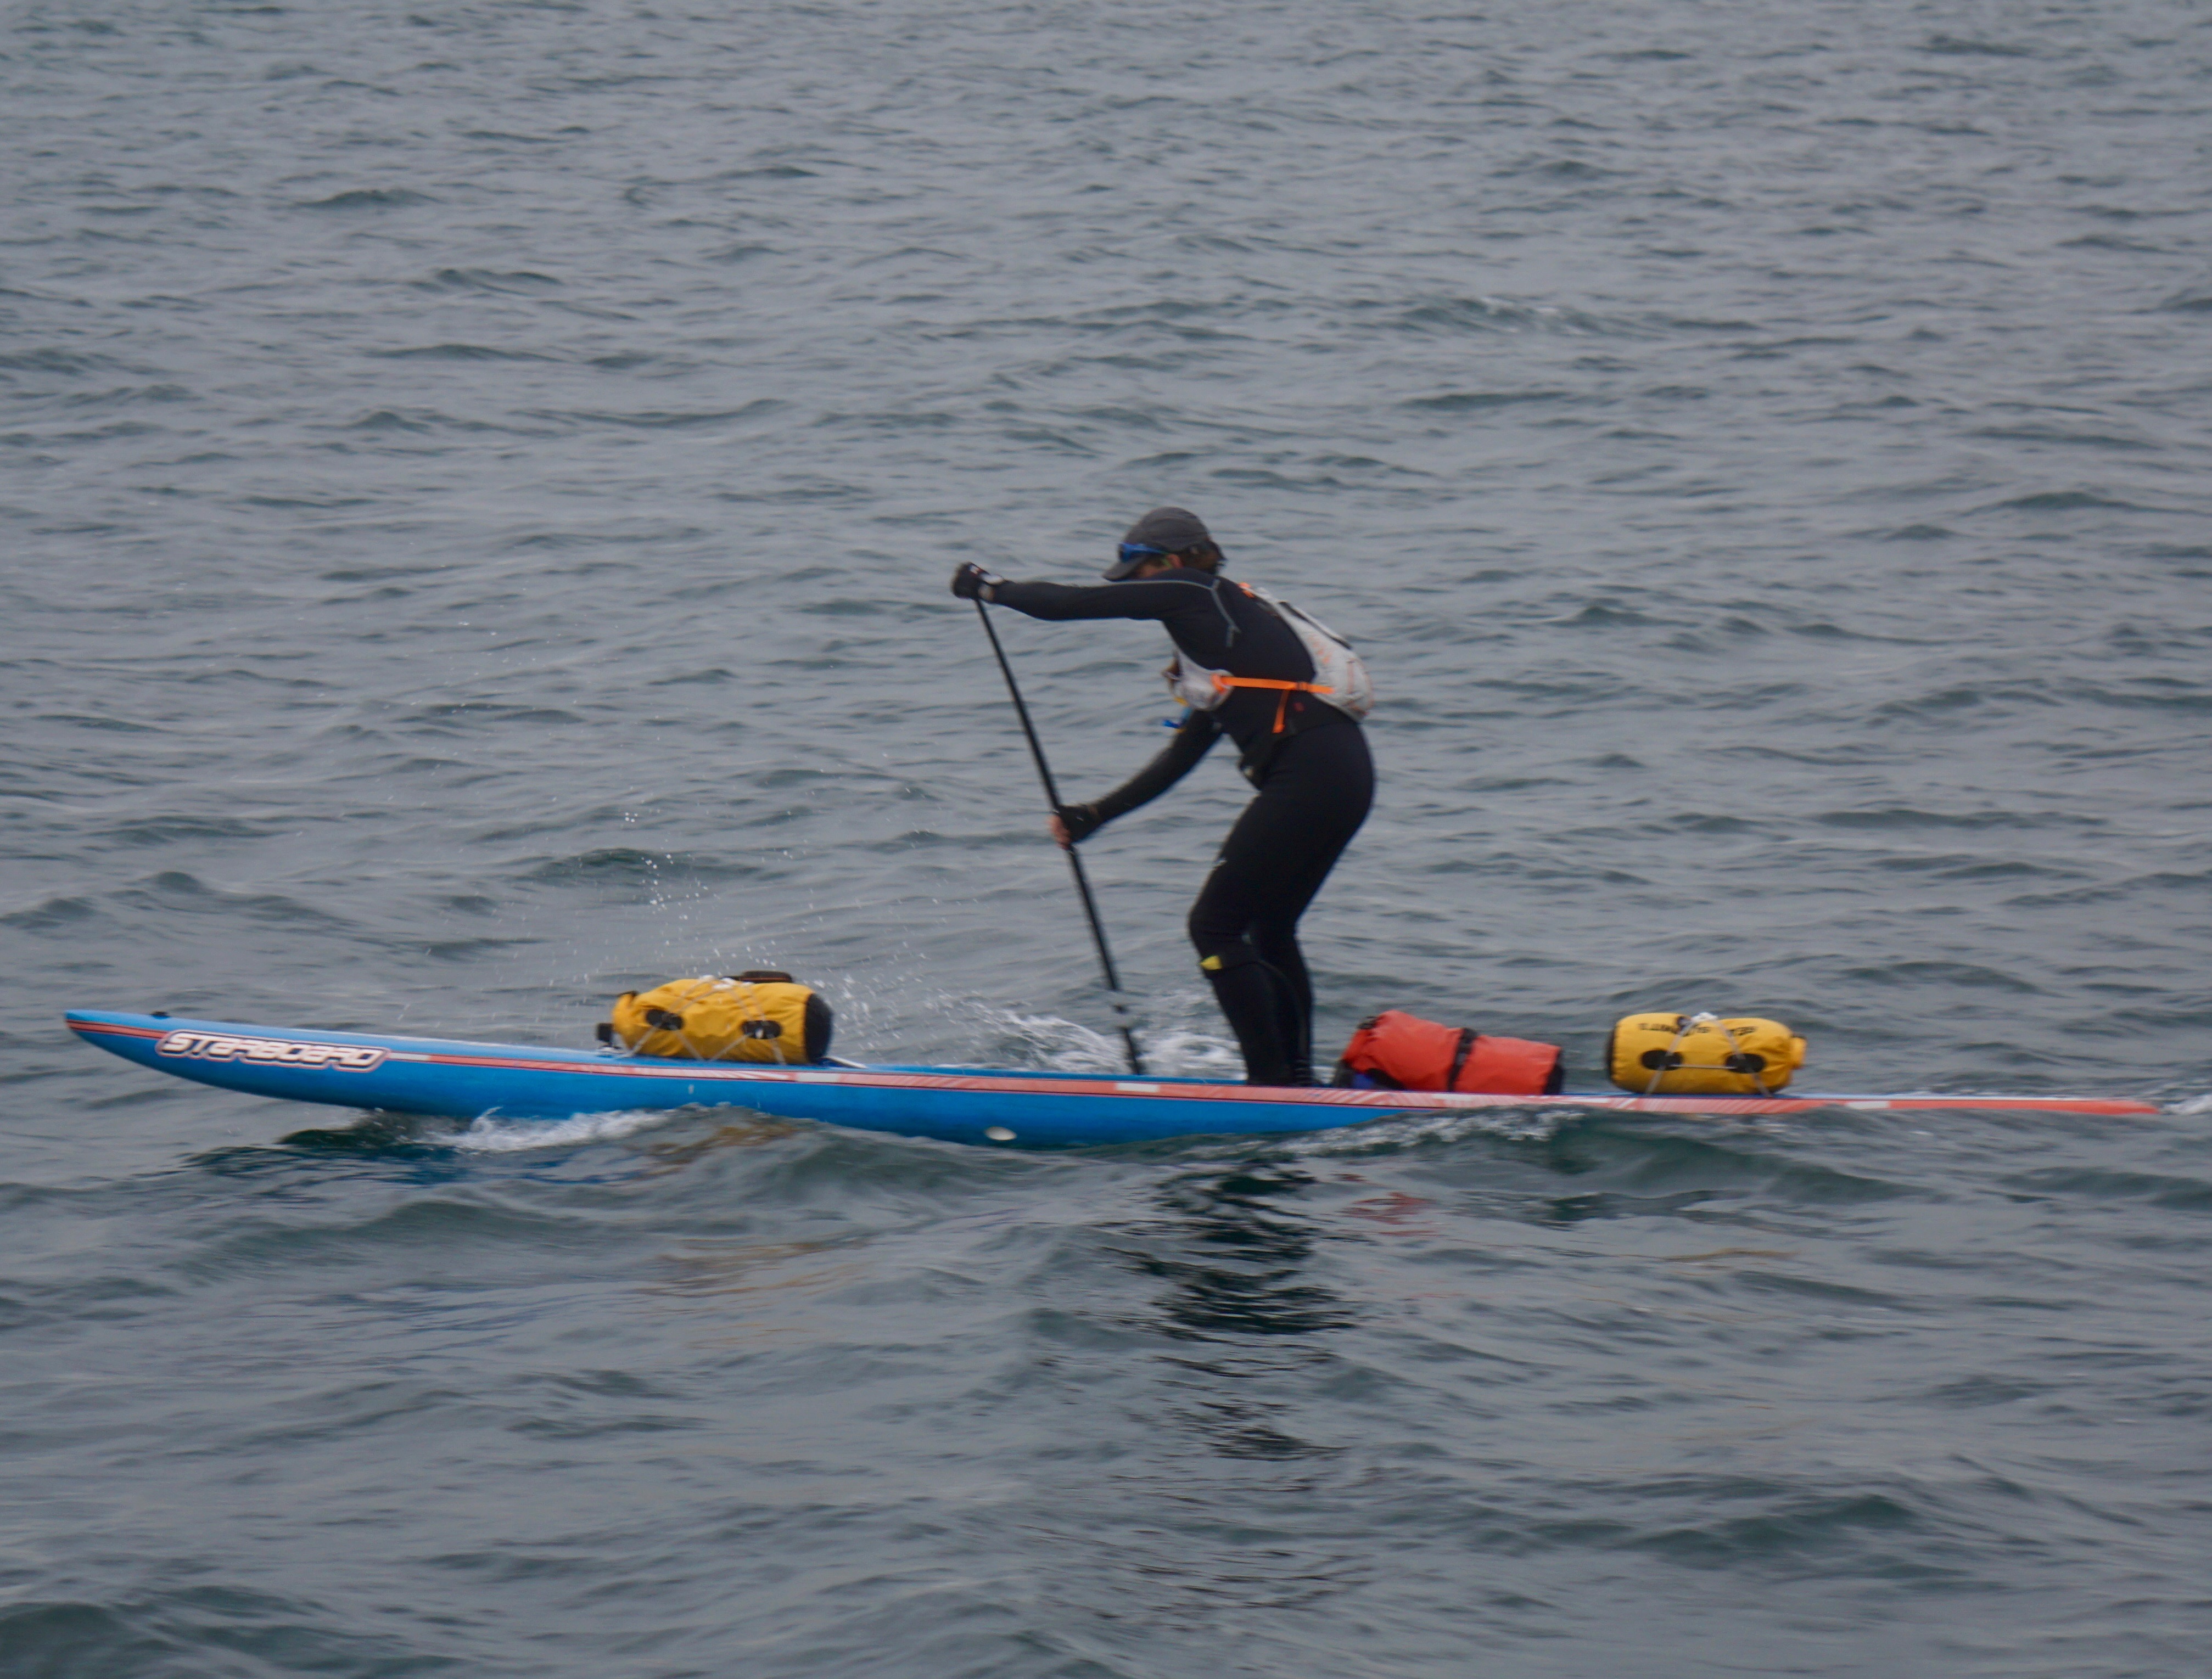 Paddleboarder Karl Kruger seeks to paddle the 750 miles all the way to the finish point in the Race to Alaska. He made it to Victoria to complete the first leg of the race Thursday. (Charlie Bermant/Peninsula Daily News)